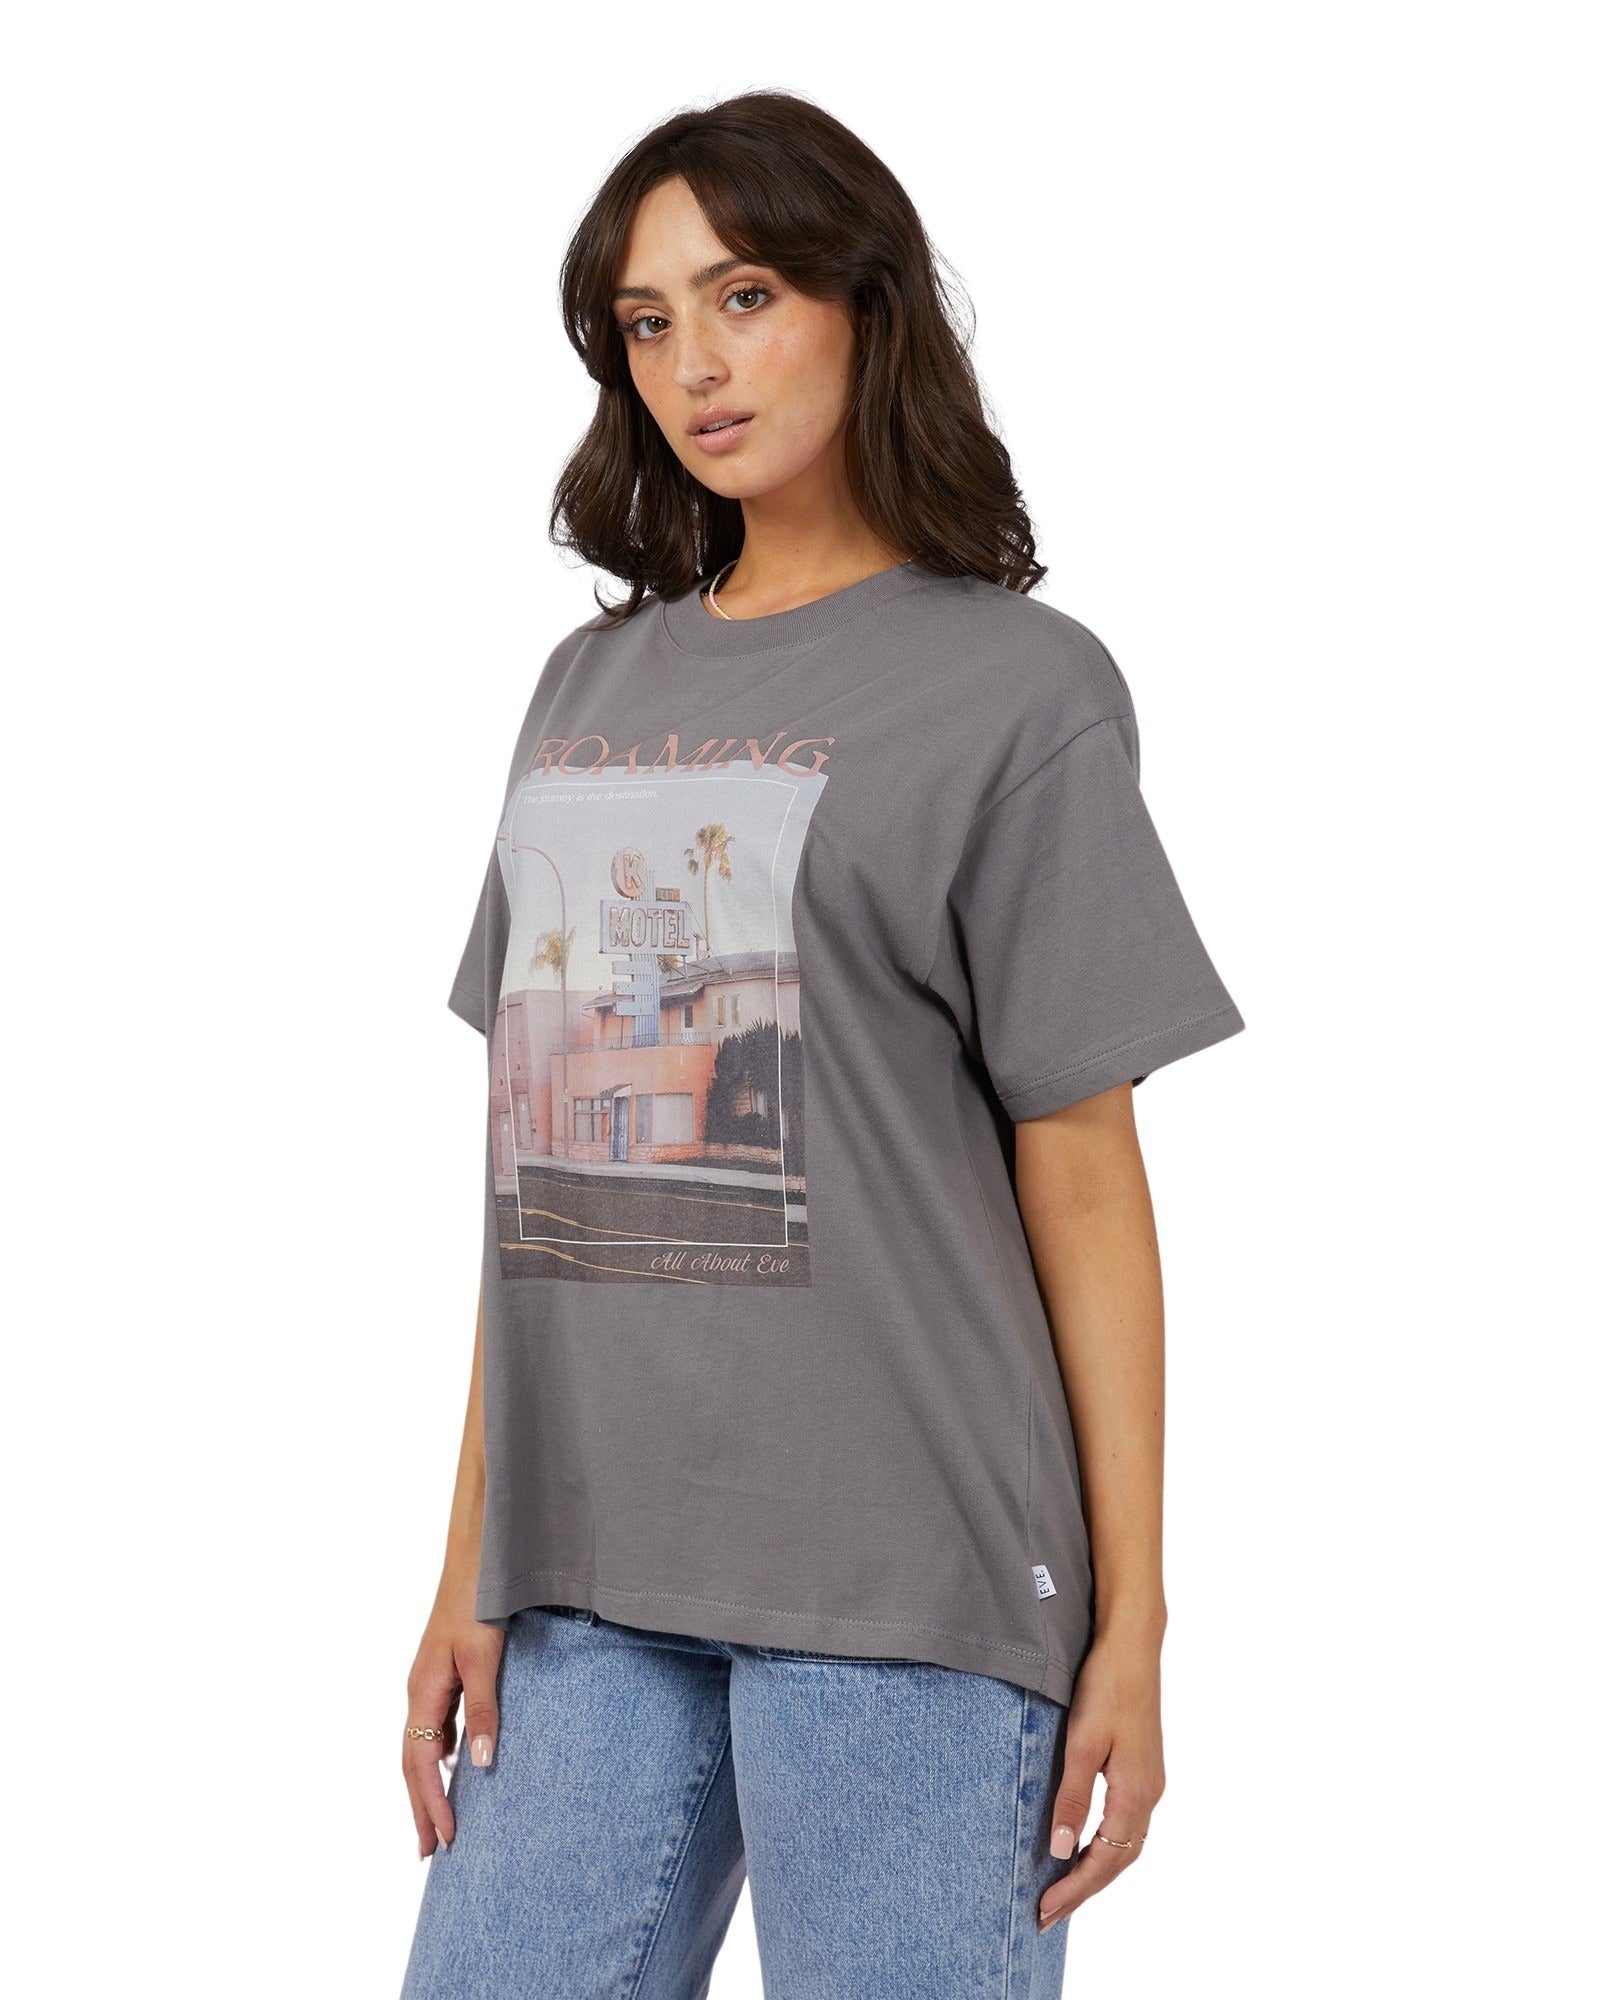 All About Eve - Destination Tee - Charcoal